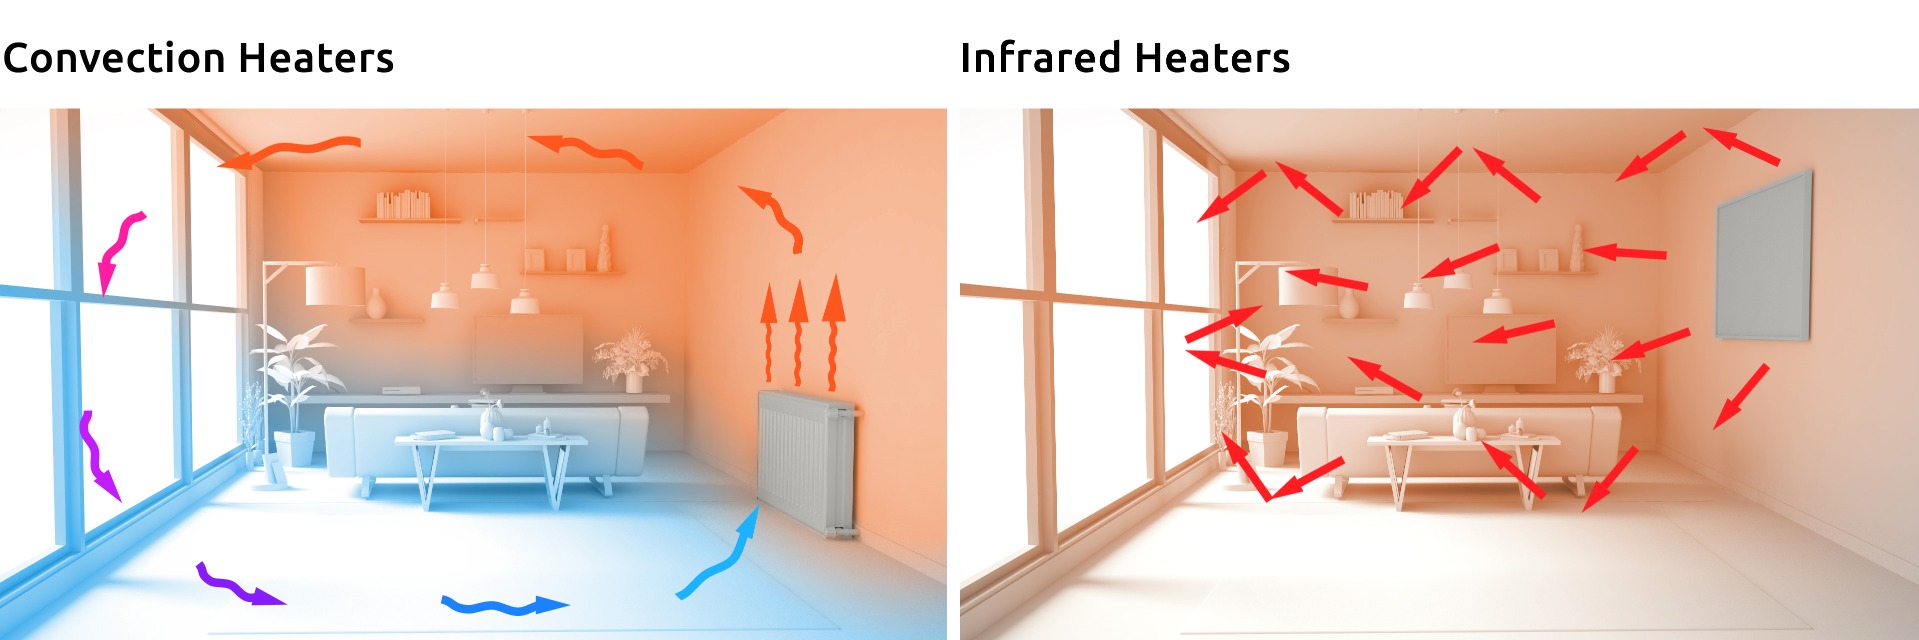 Convection vs. IR Heating - How Does Infrared Heating Work?